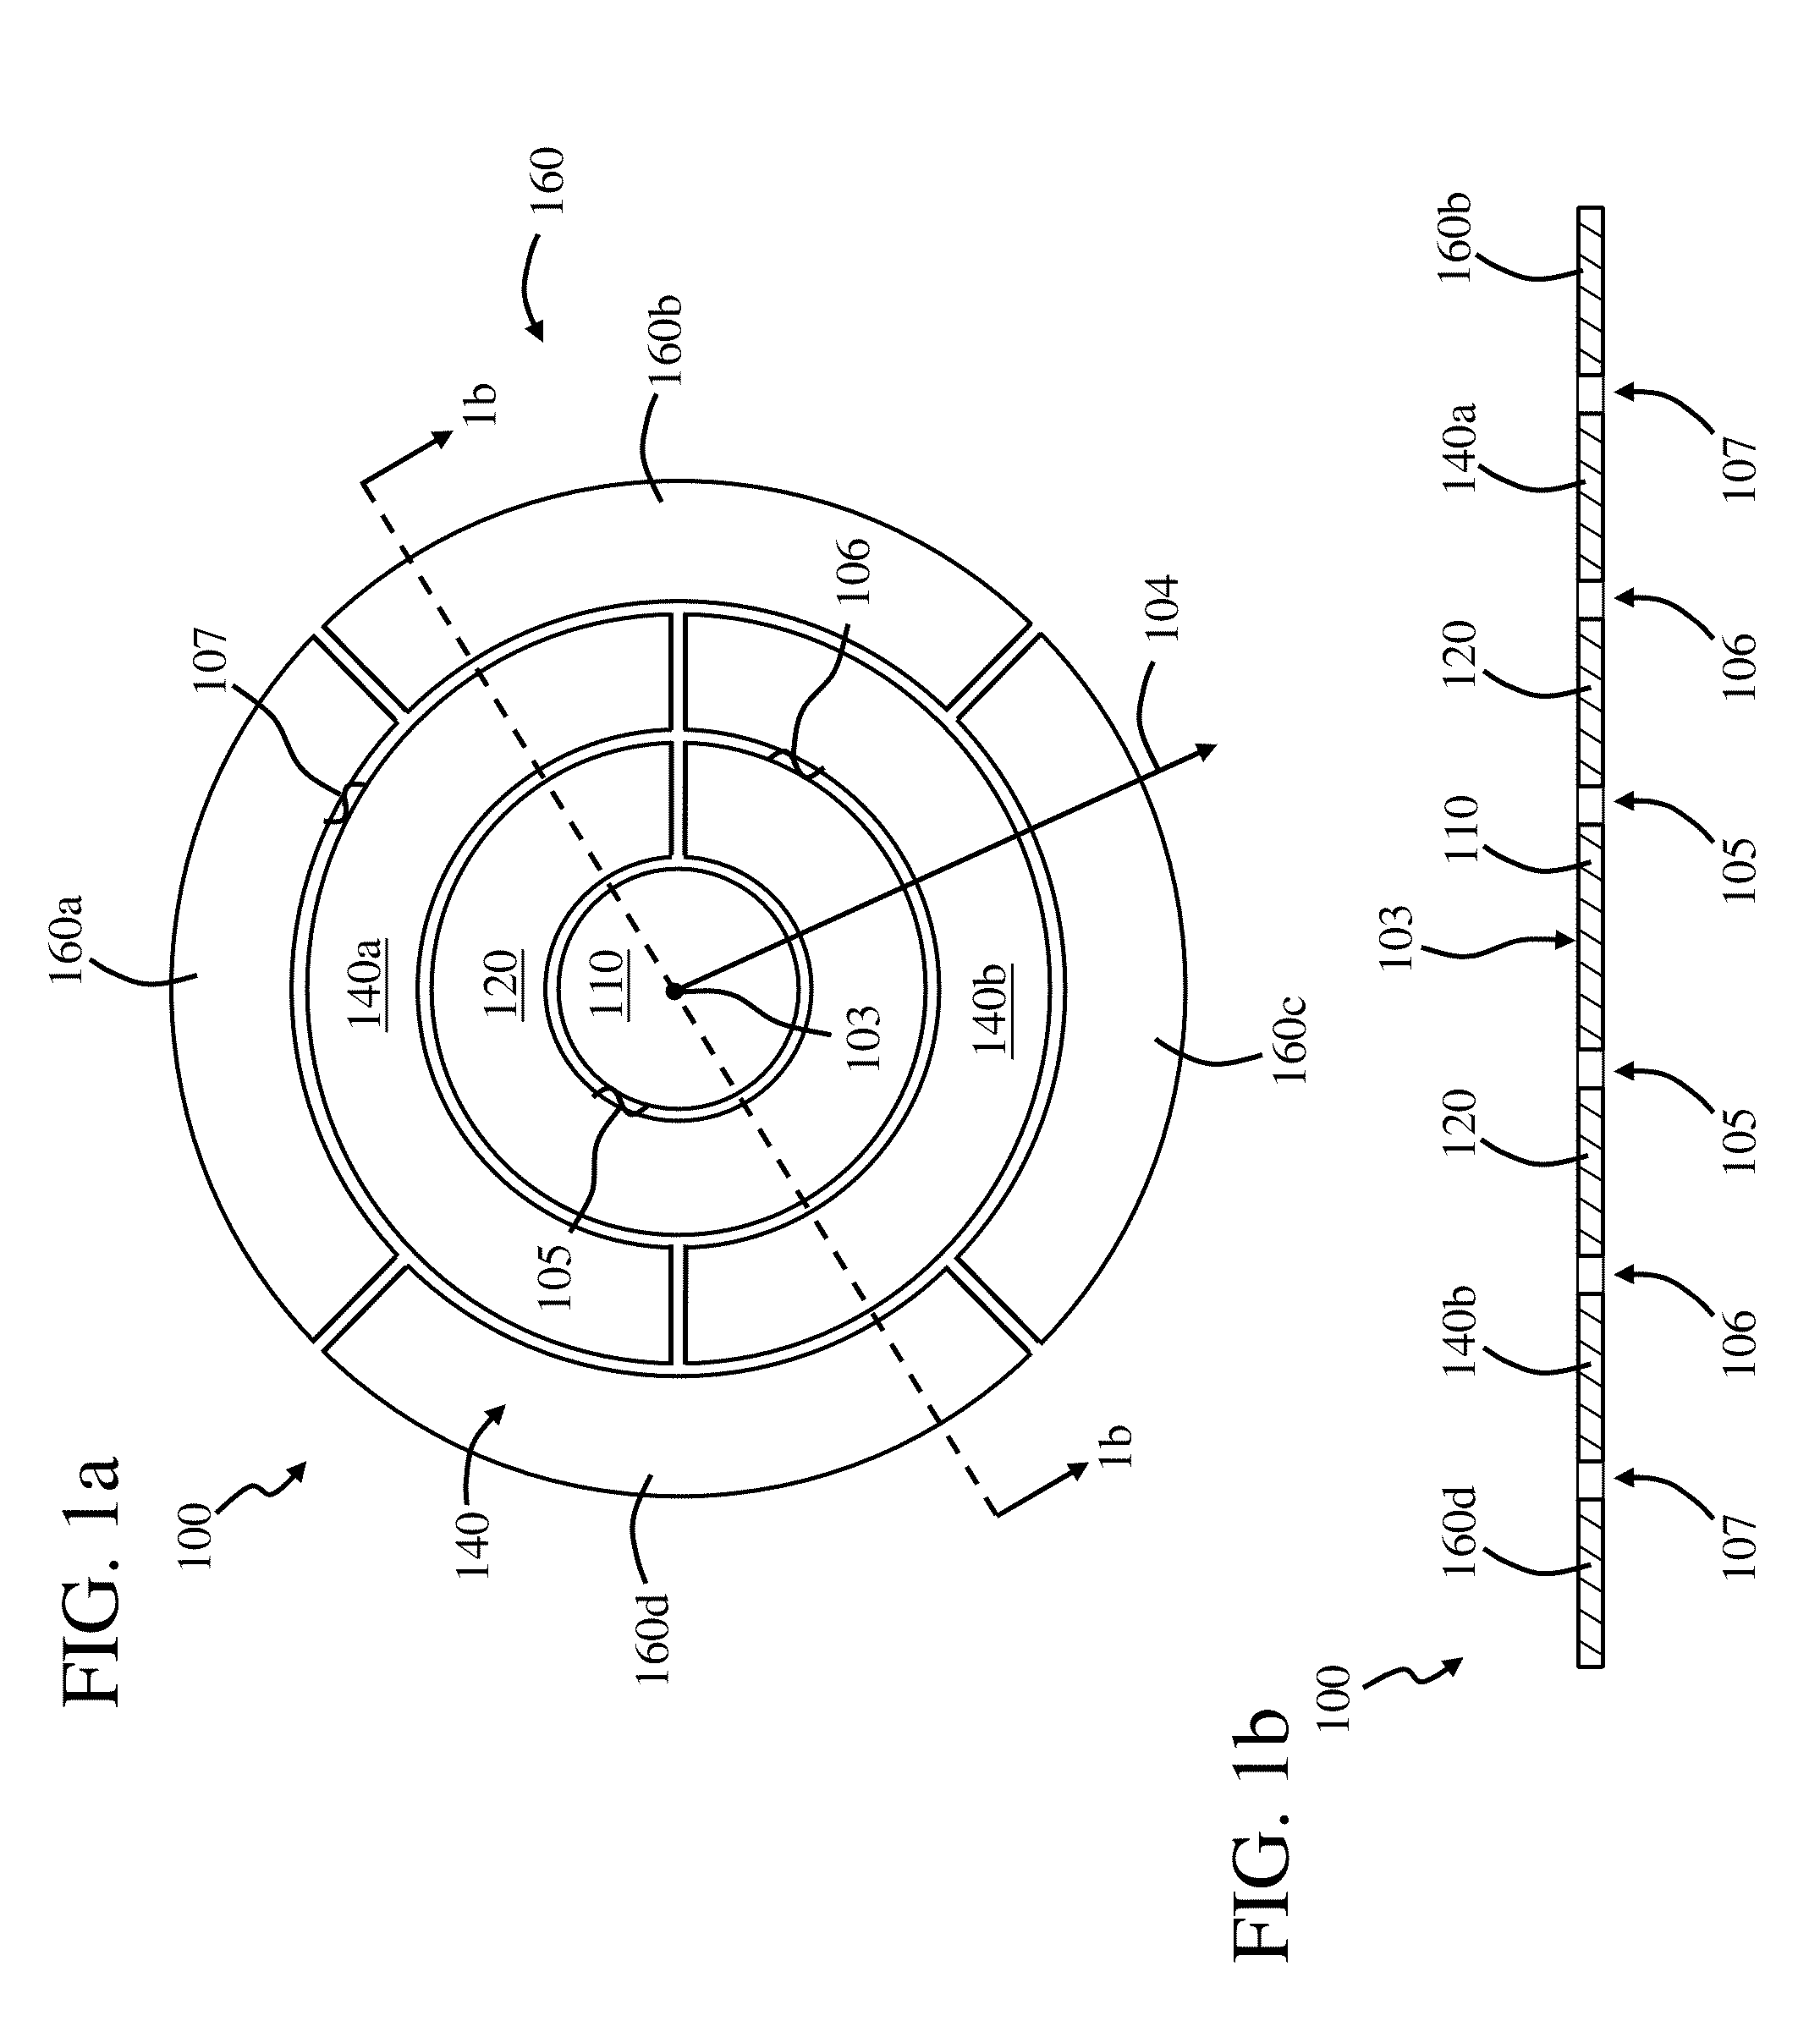 Semiconductor deposition system and method